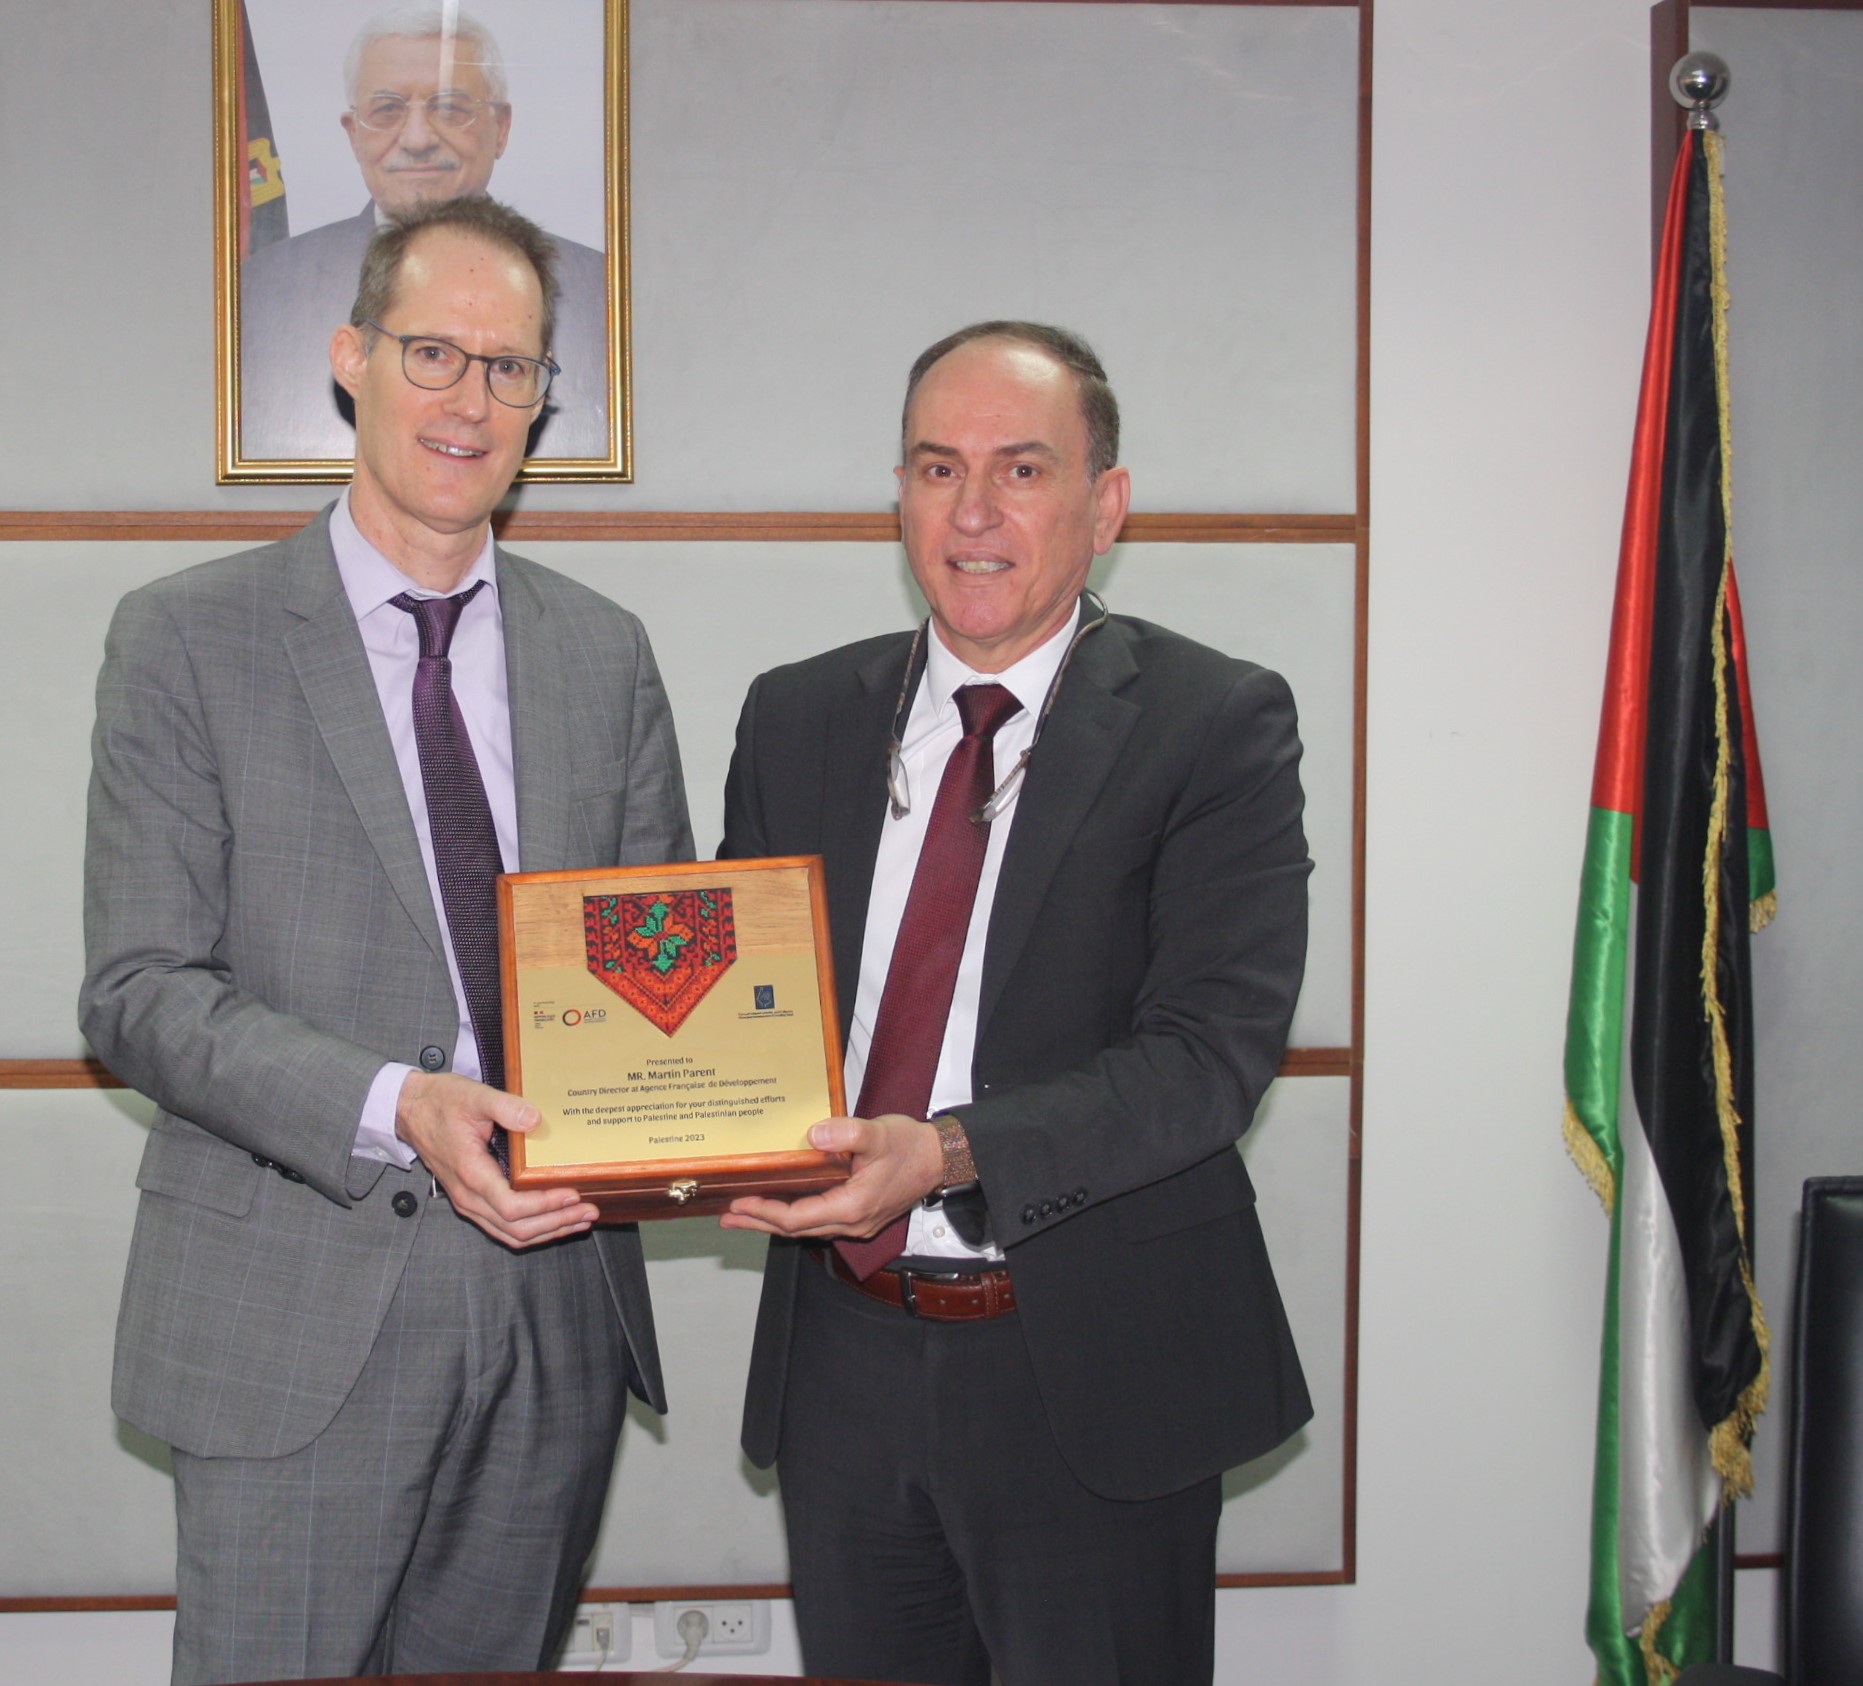 MDLF Honors Director of the French Development Agency on the Conclusion of His Mission in Palestine